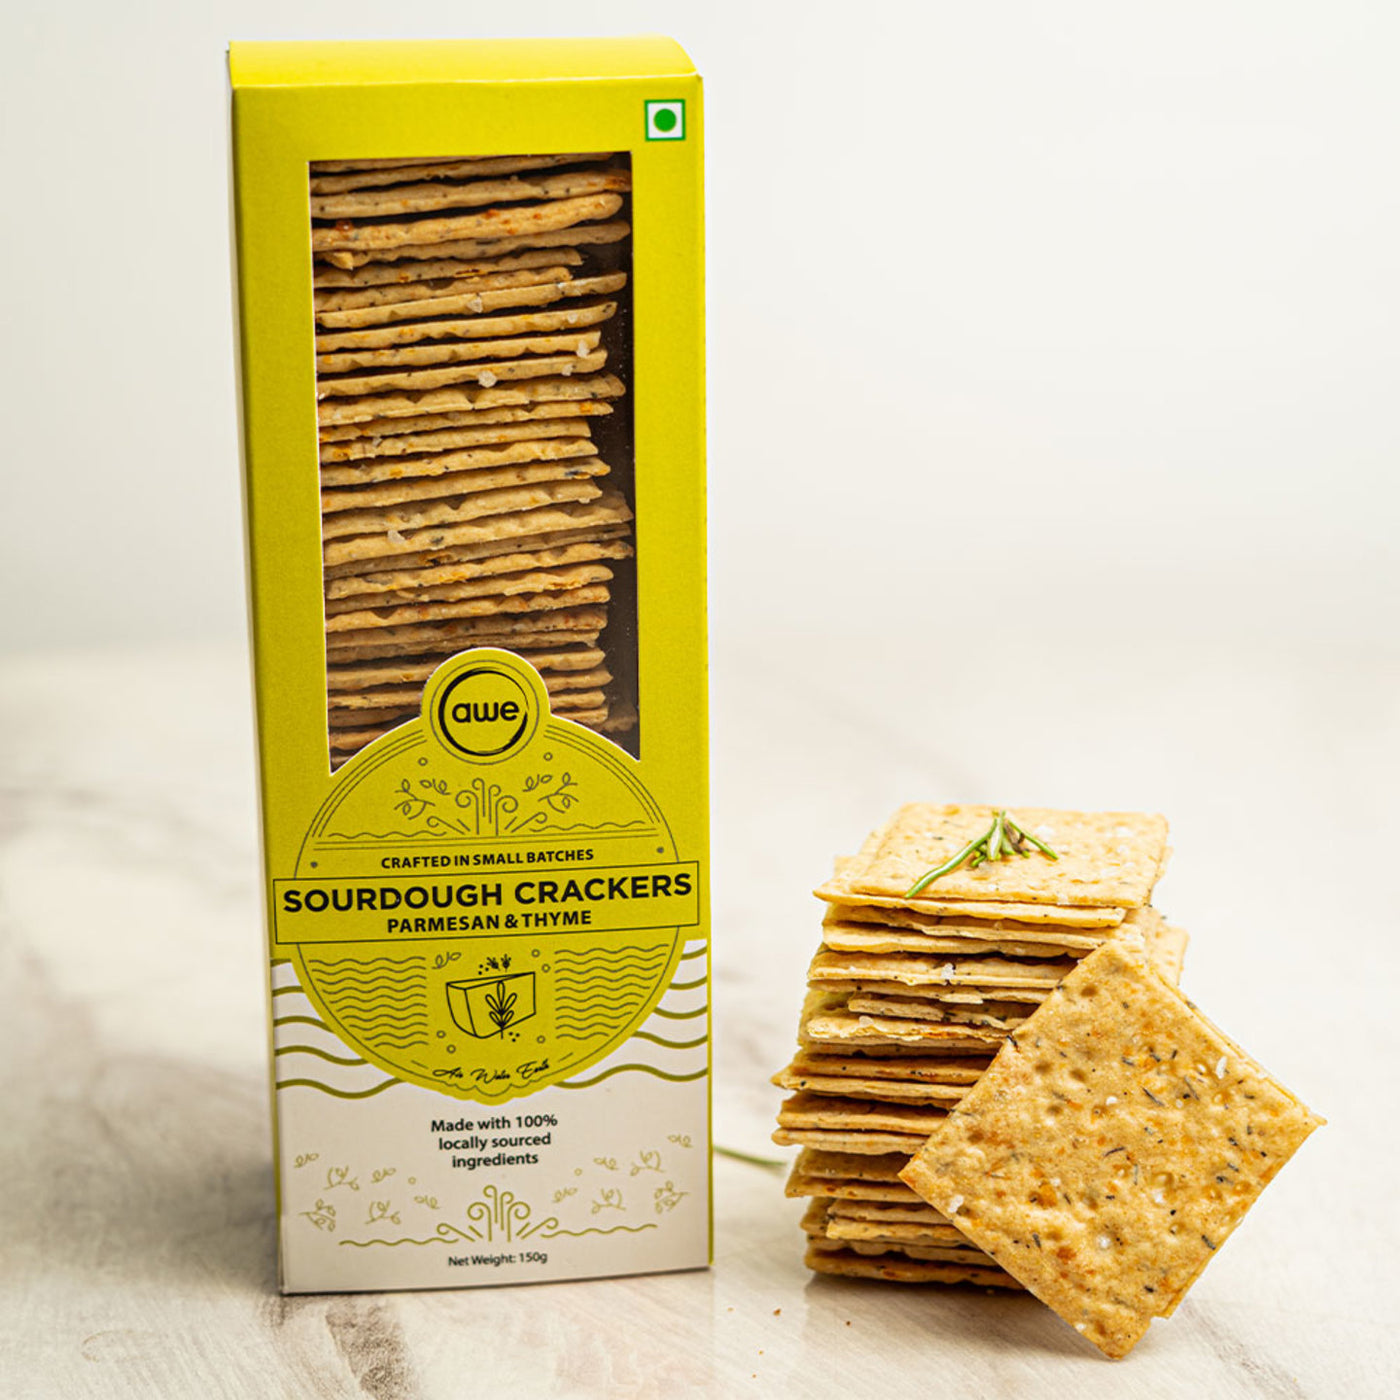 Infused with the notes of thyme and the gritty texture of parmesan, these whole-wheat sourdough crackers are a gut friendly munchy snack.